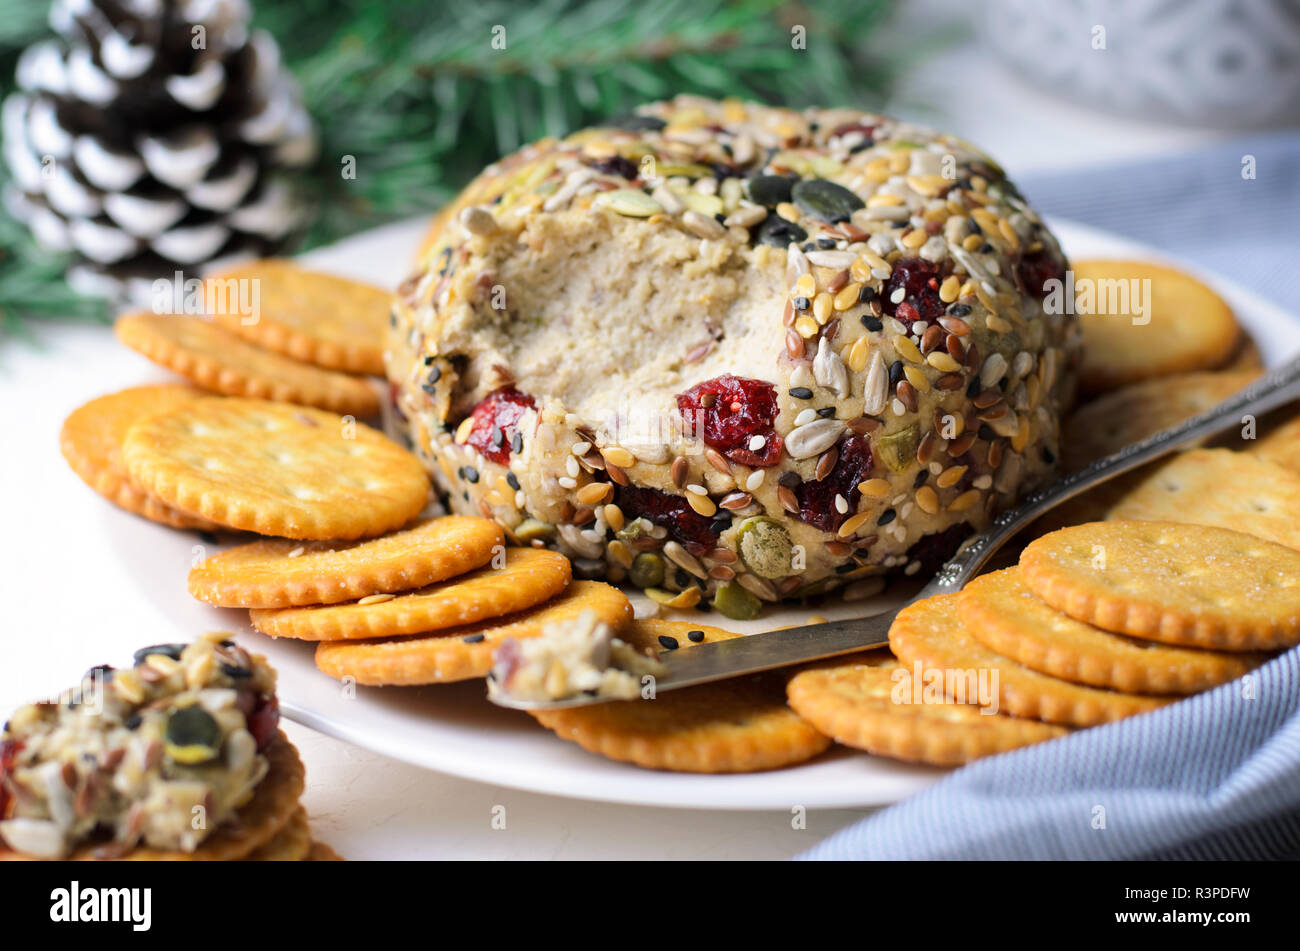 Vegan Cheese Ball Appetizer Served with Crackers, Hummus or Nut Butter Spread Stock Photo